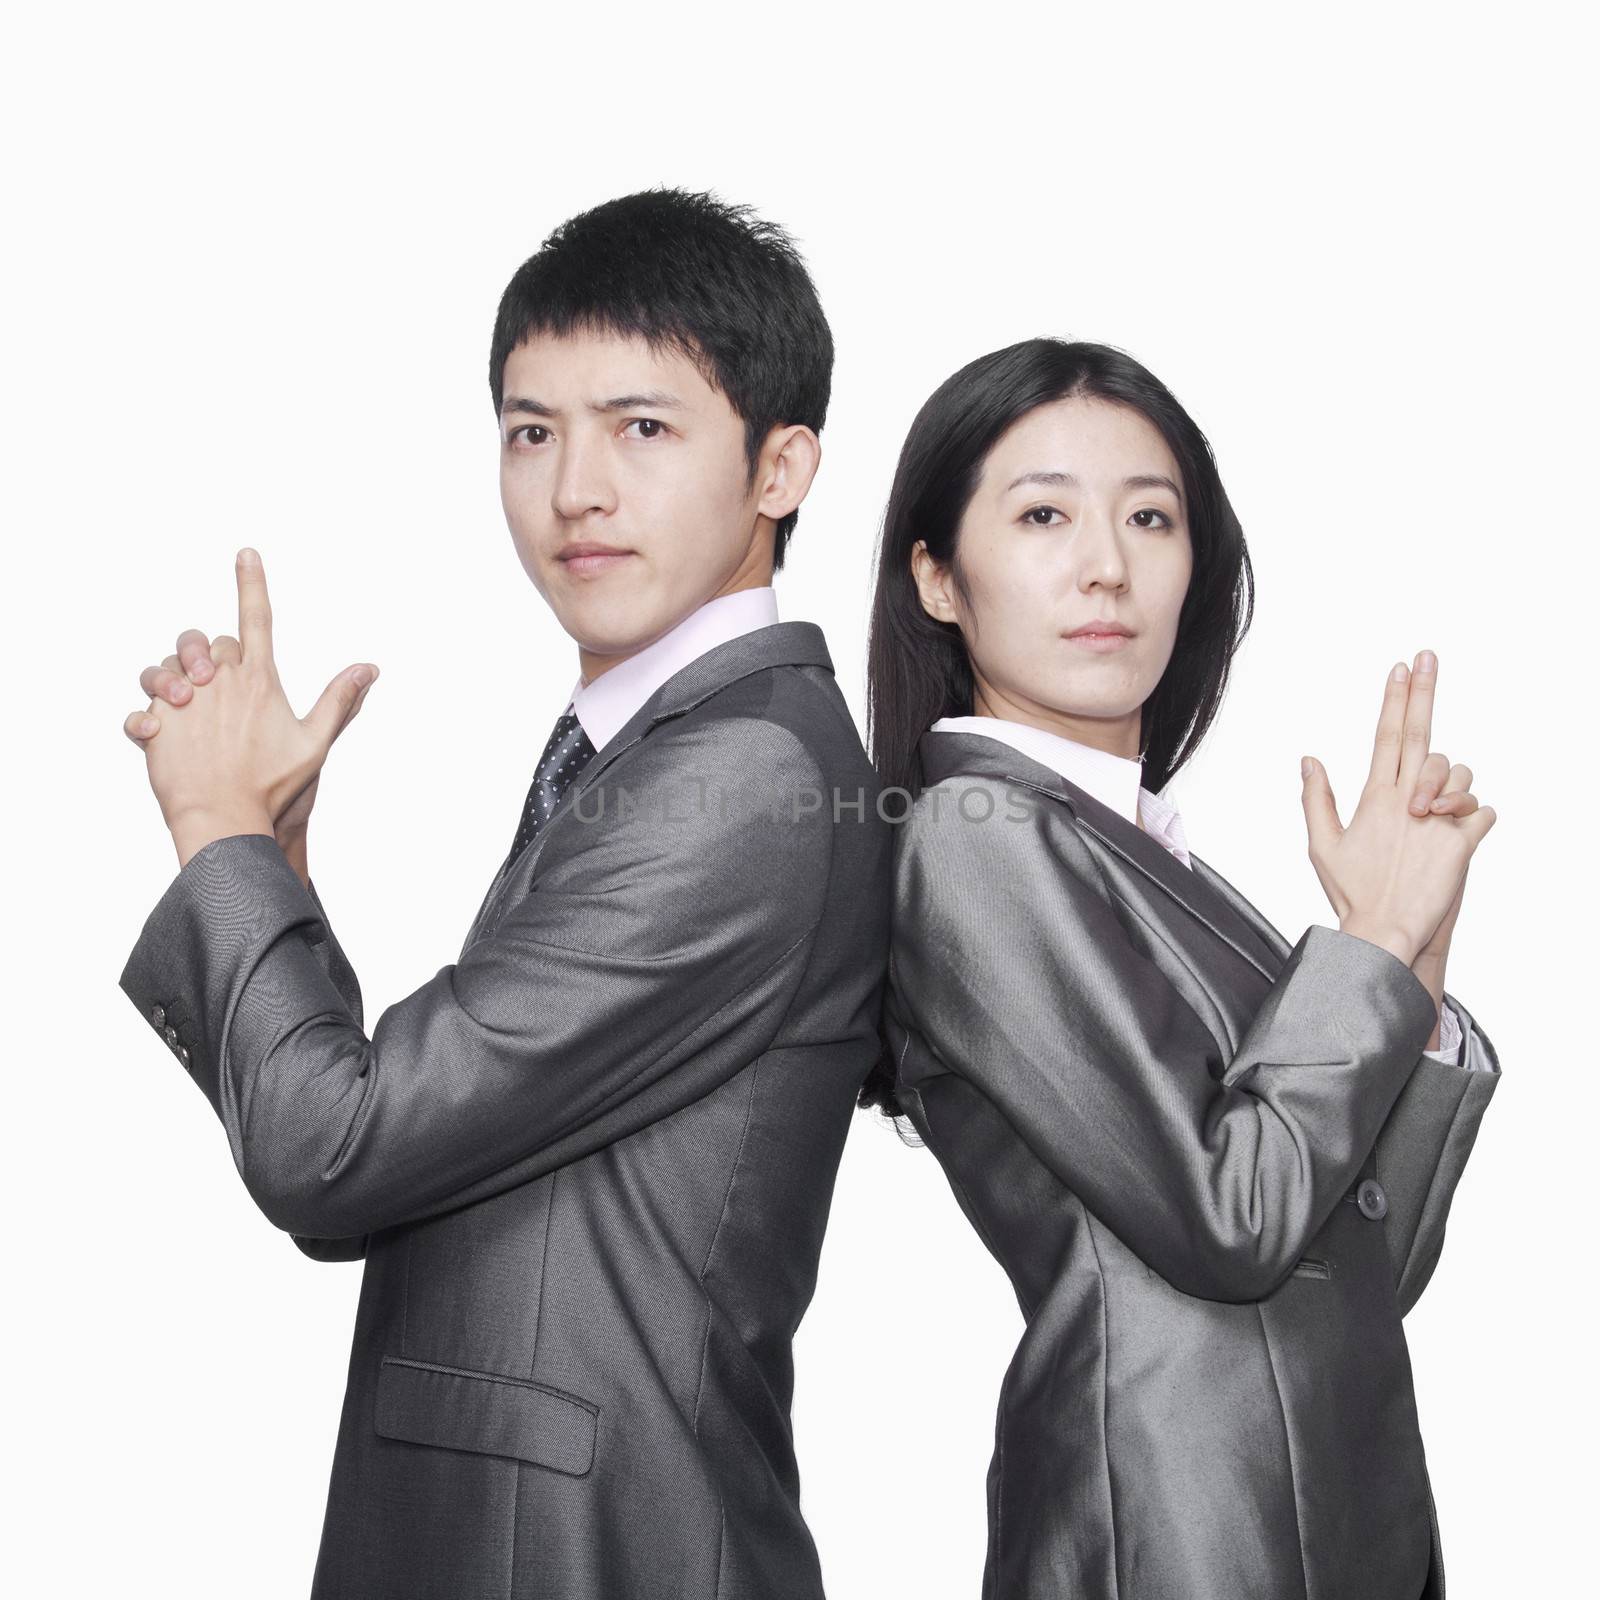 Businessman and businesswoman standing back to back and showing hand guns